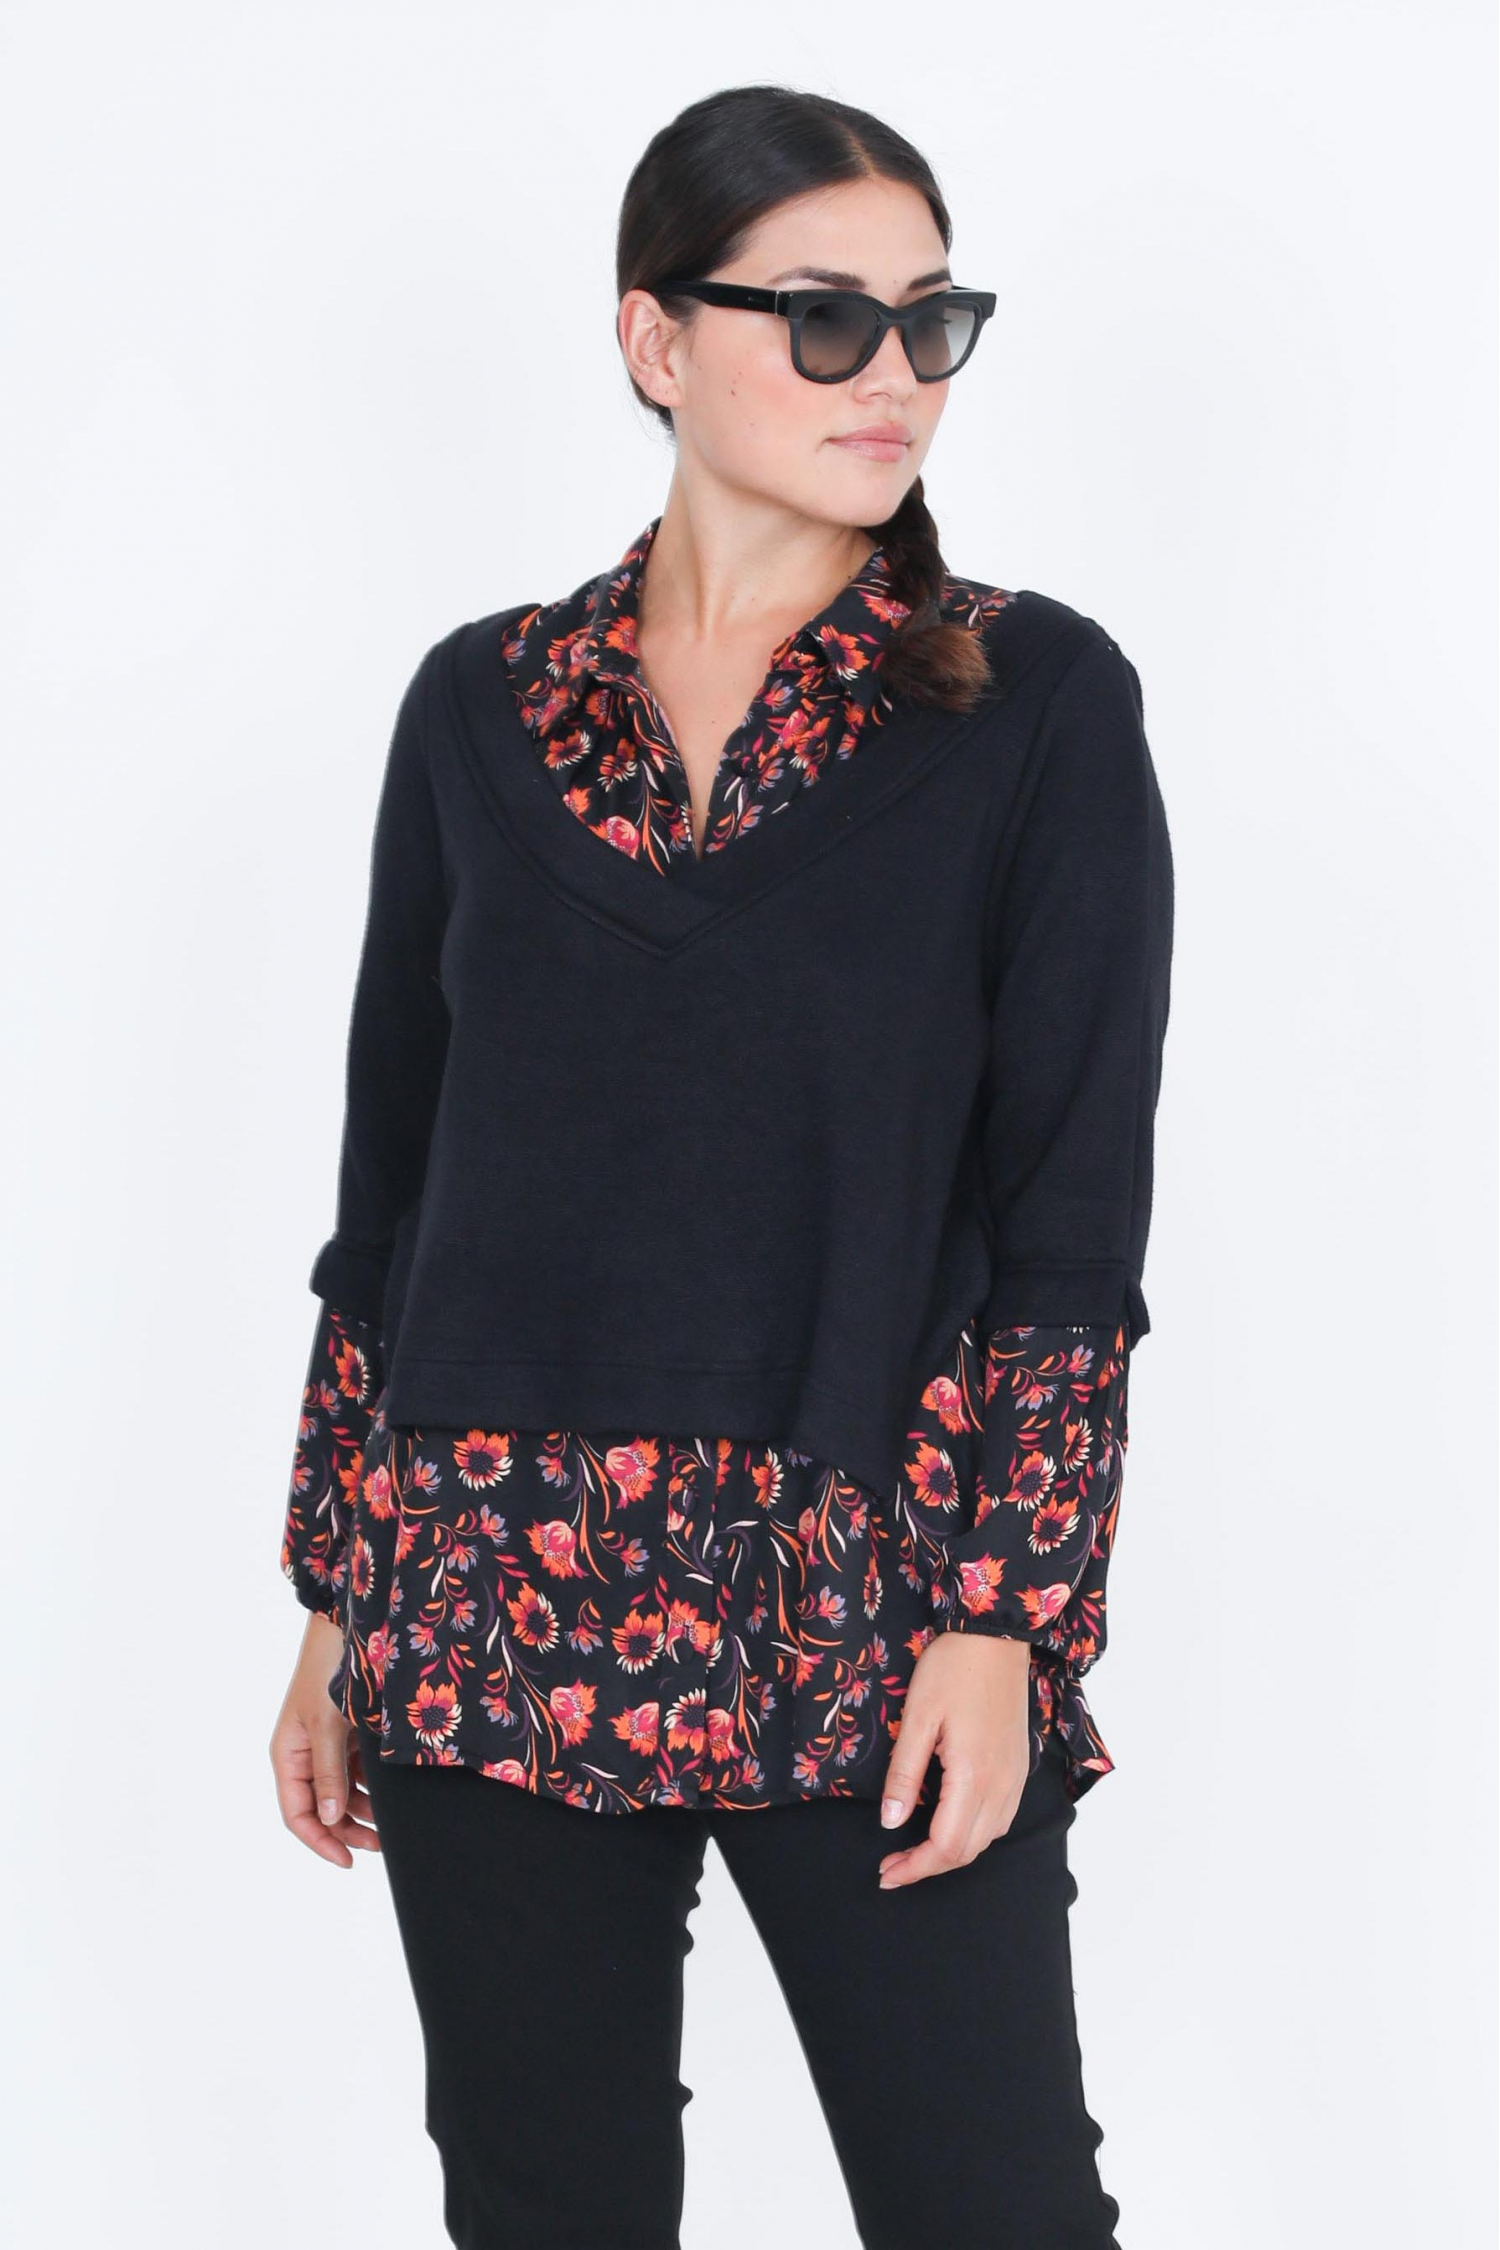 Plain knit sweater with printed layering effect